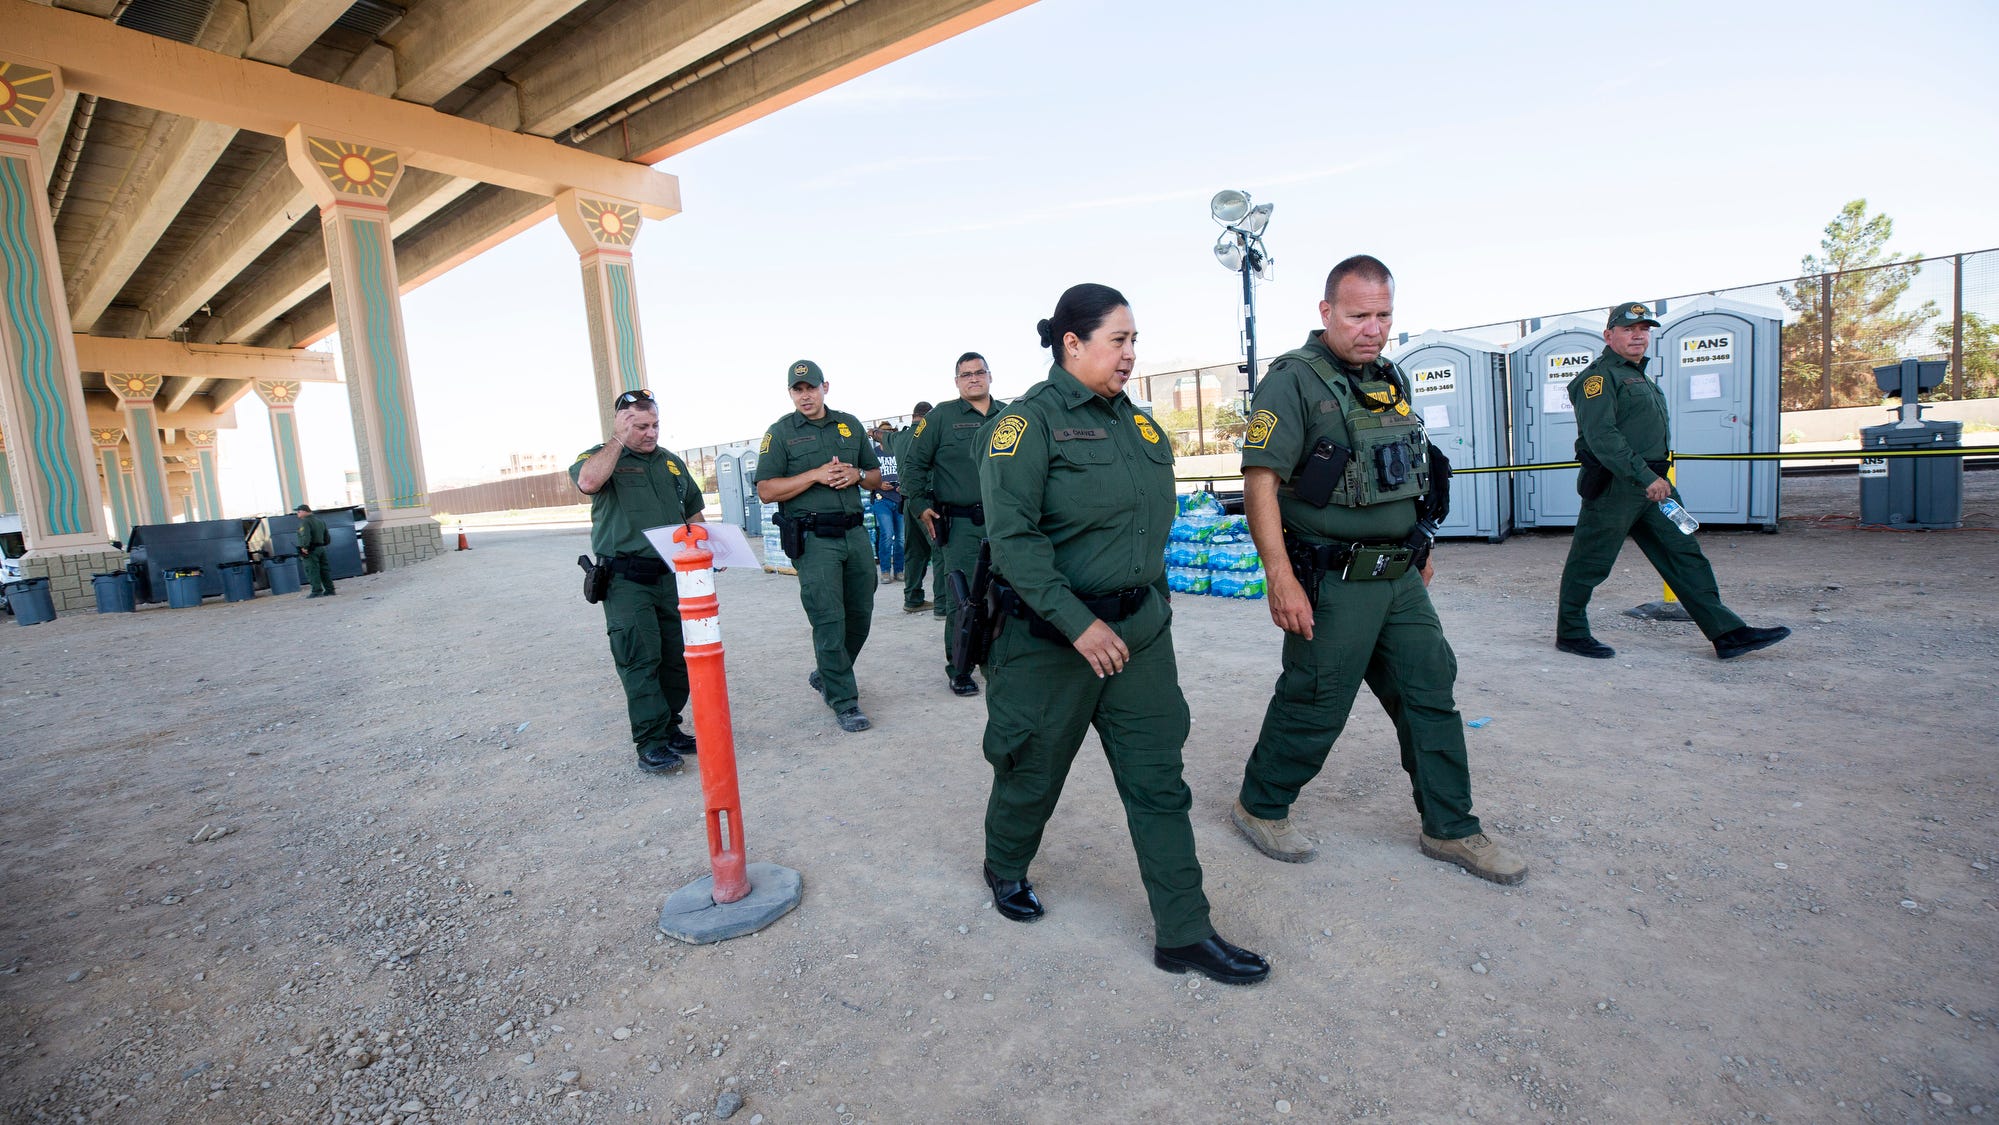 El Paso Sector U.S. Border Patrol Chief Gloria I. Chavez, third from right, visits an area where migrants are being processed just north of the Rio Grande in El Paso, Texas, on Tuesday.